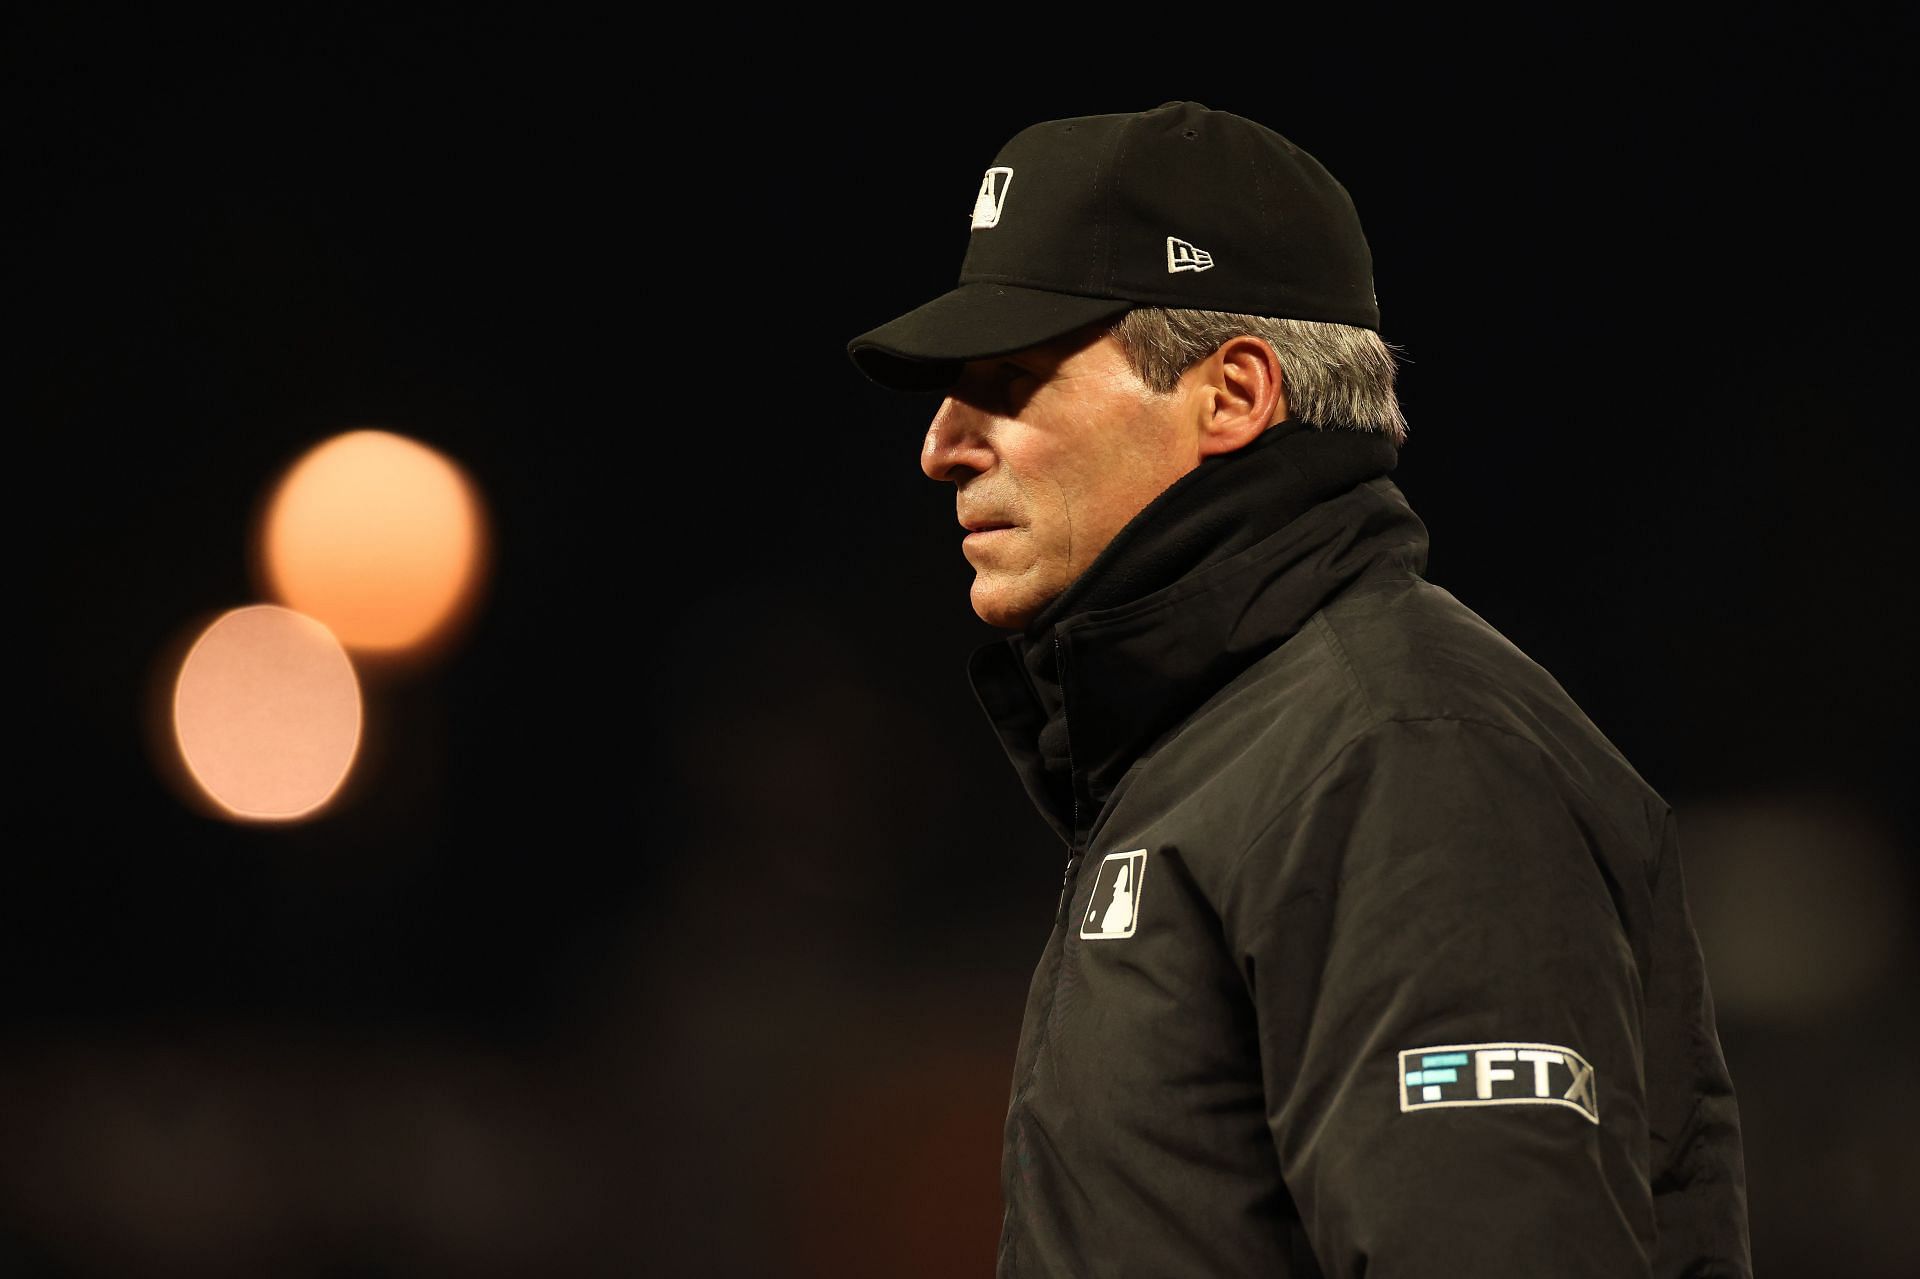 Report MLB gives controversial umpire 96 grade for a bad call that